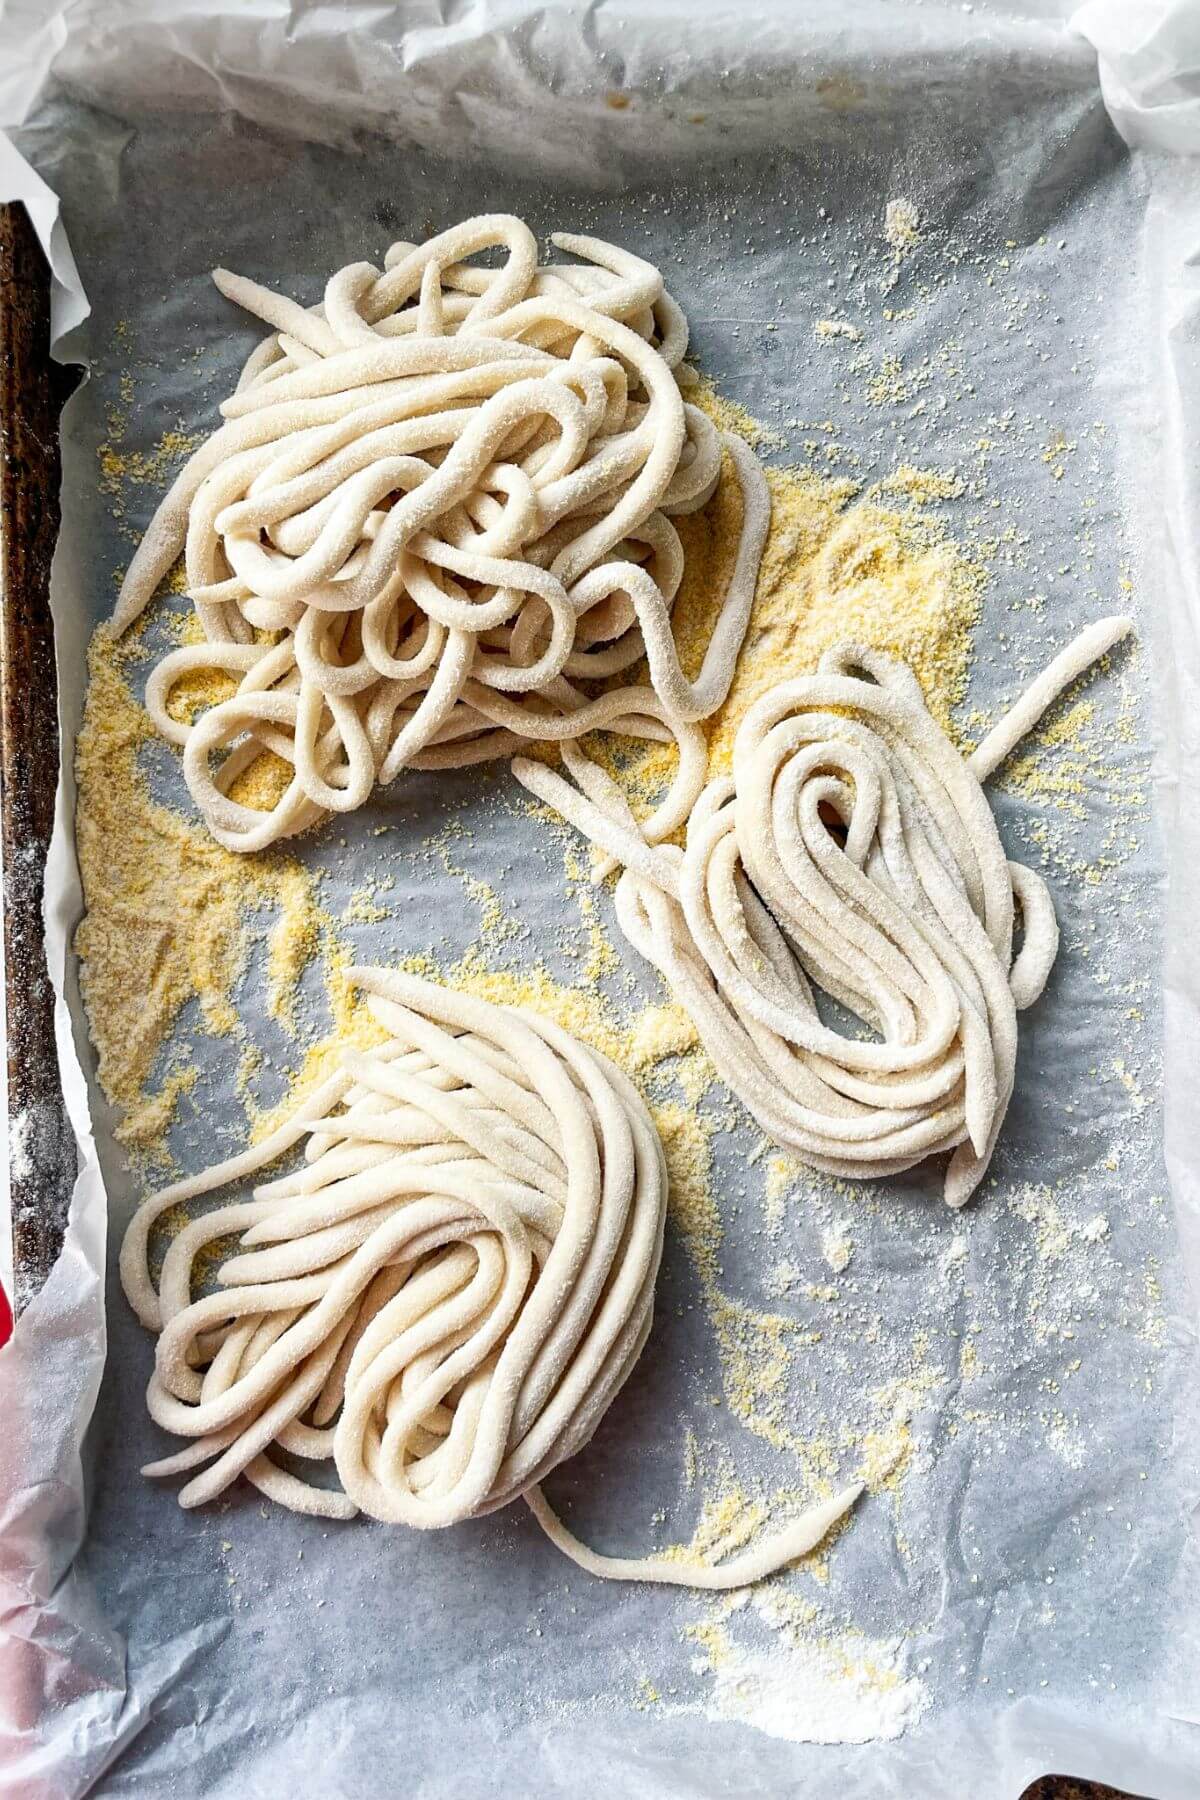 Pici pasta nestled on a lined baking tray.